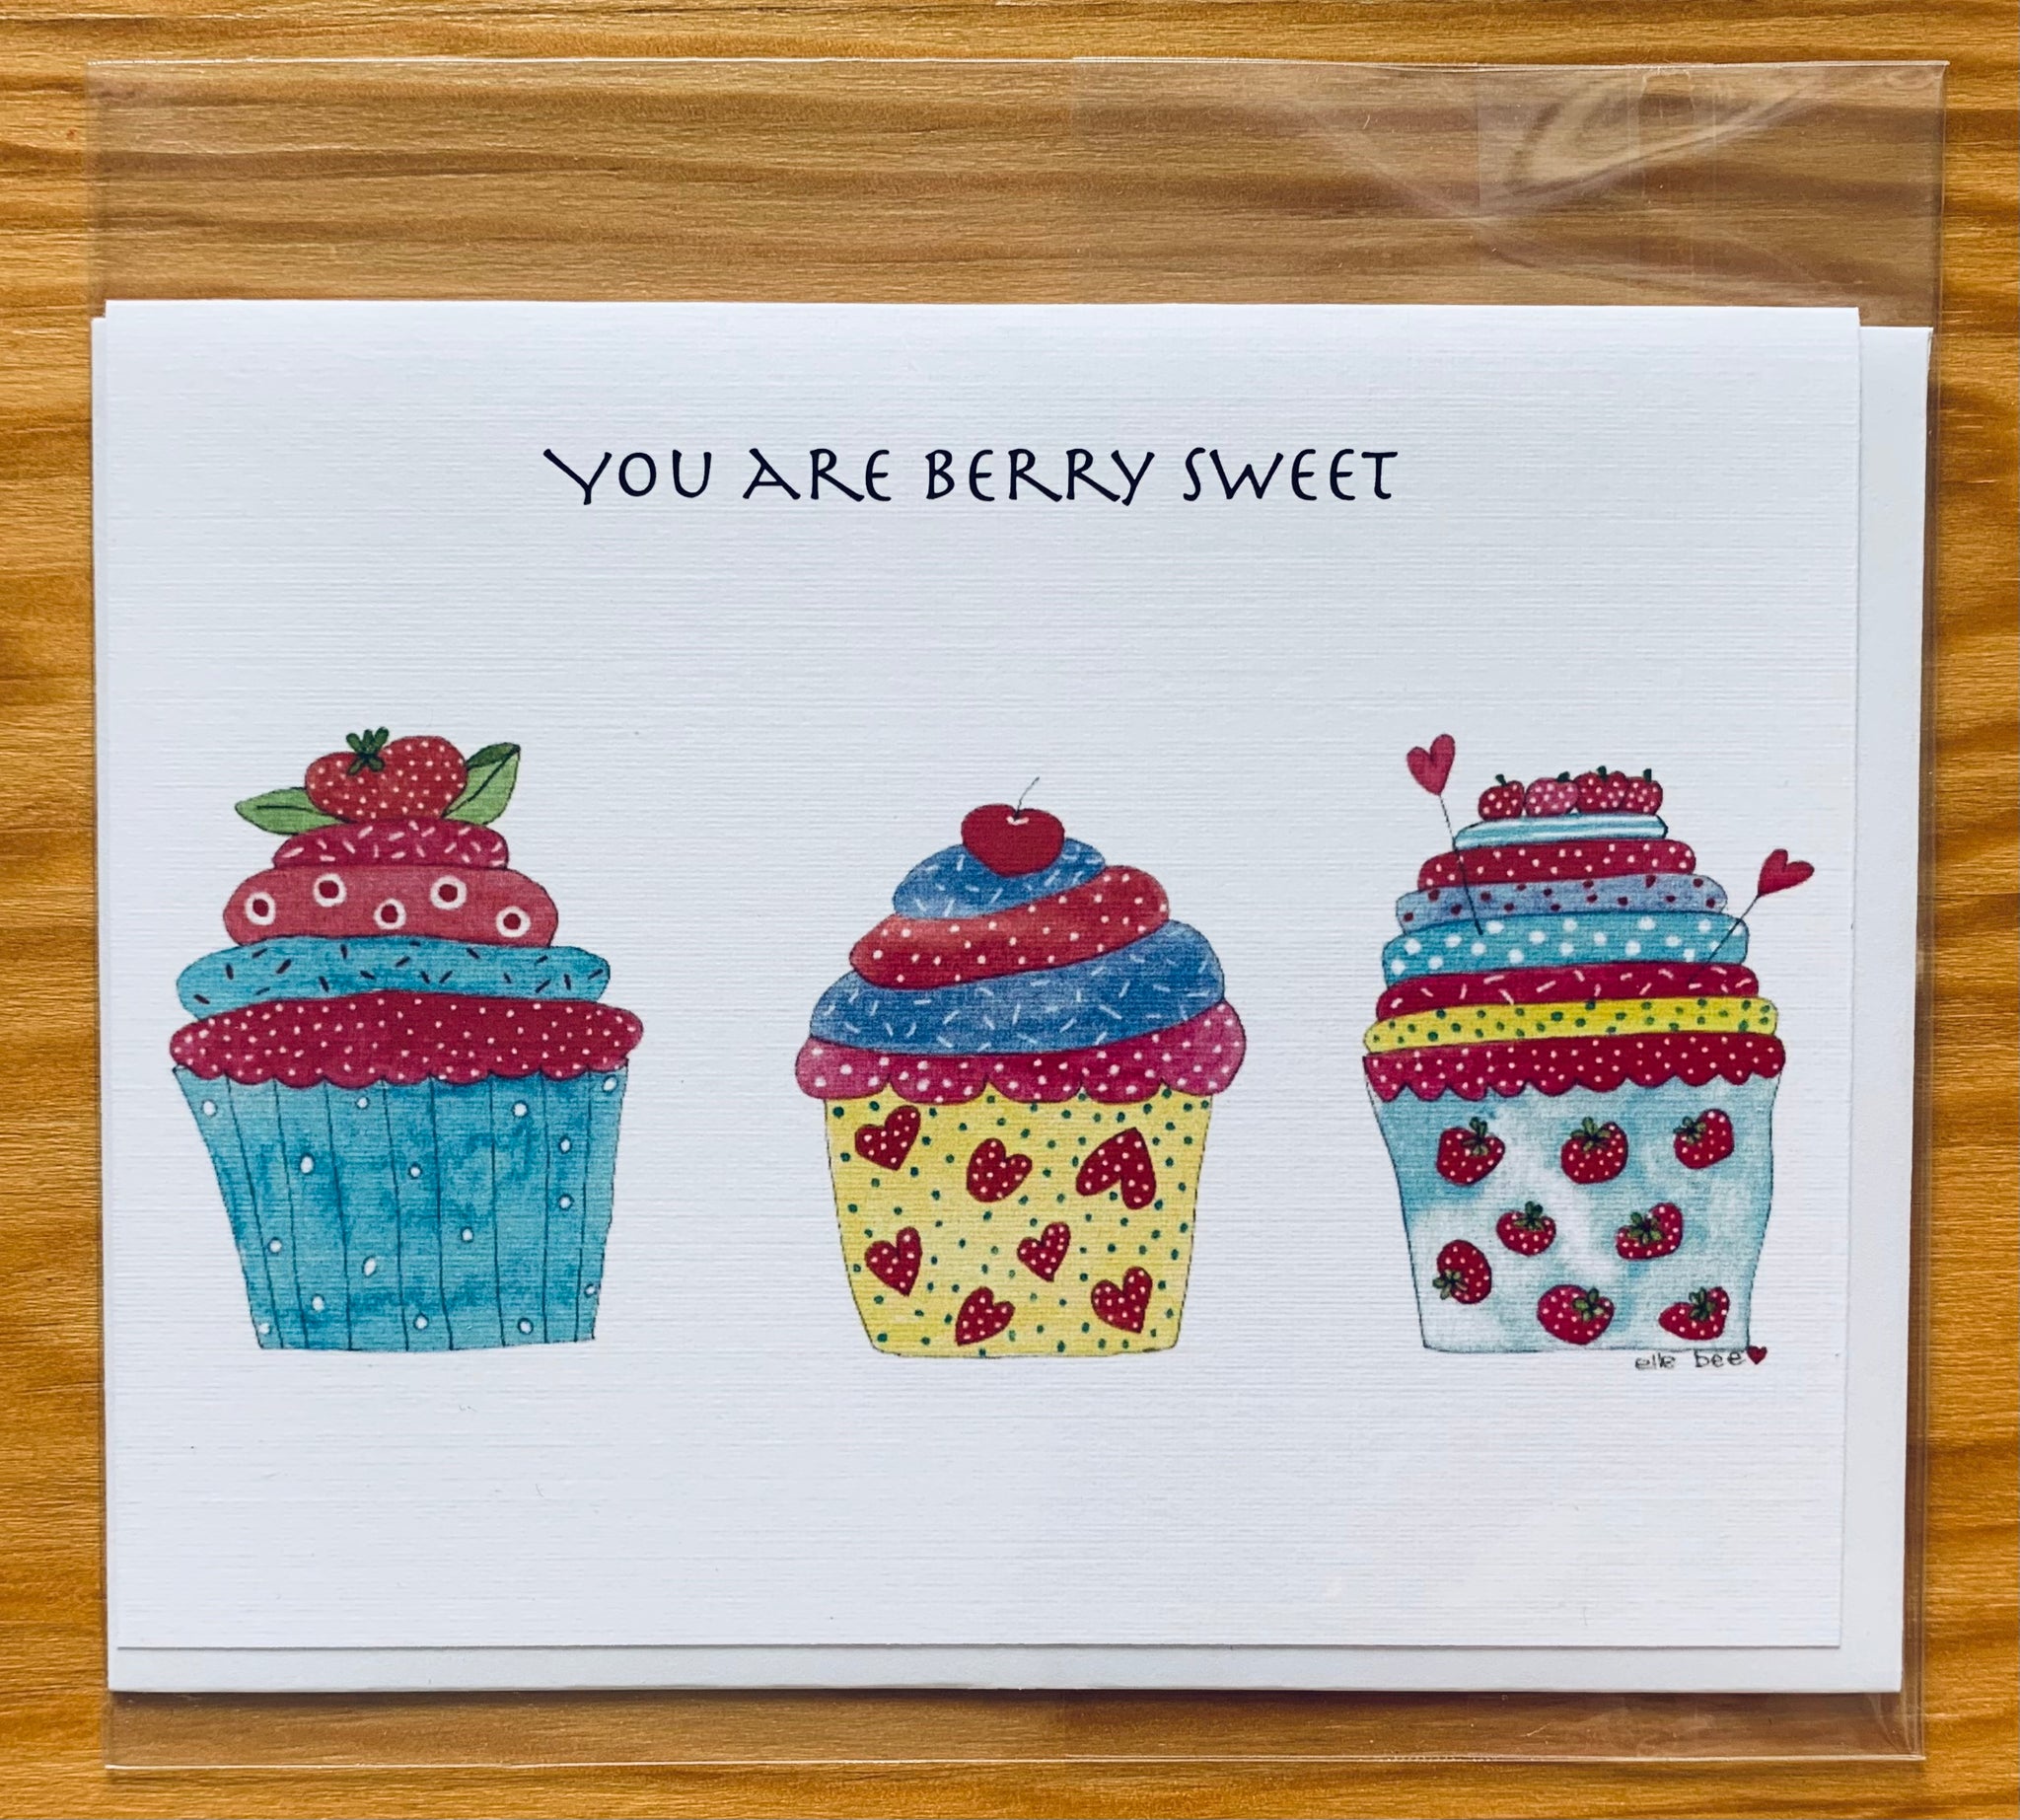 "You are berry sweet" greeting card